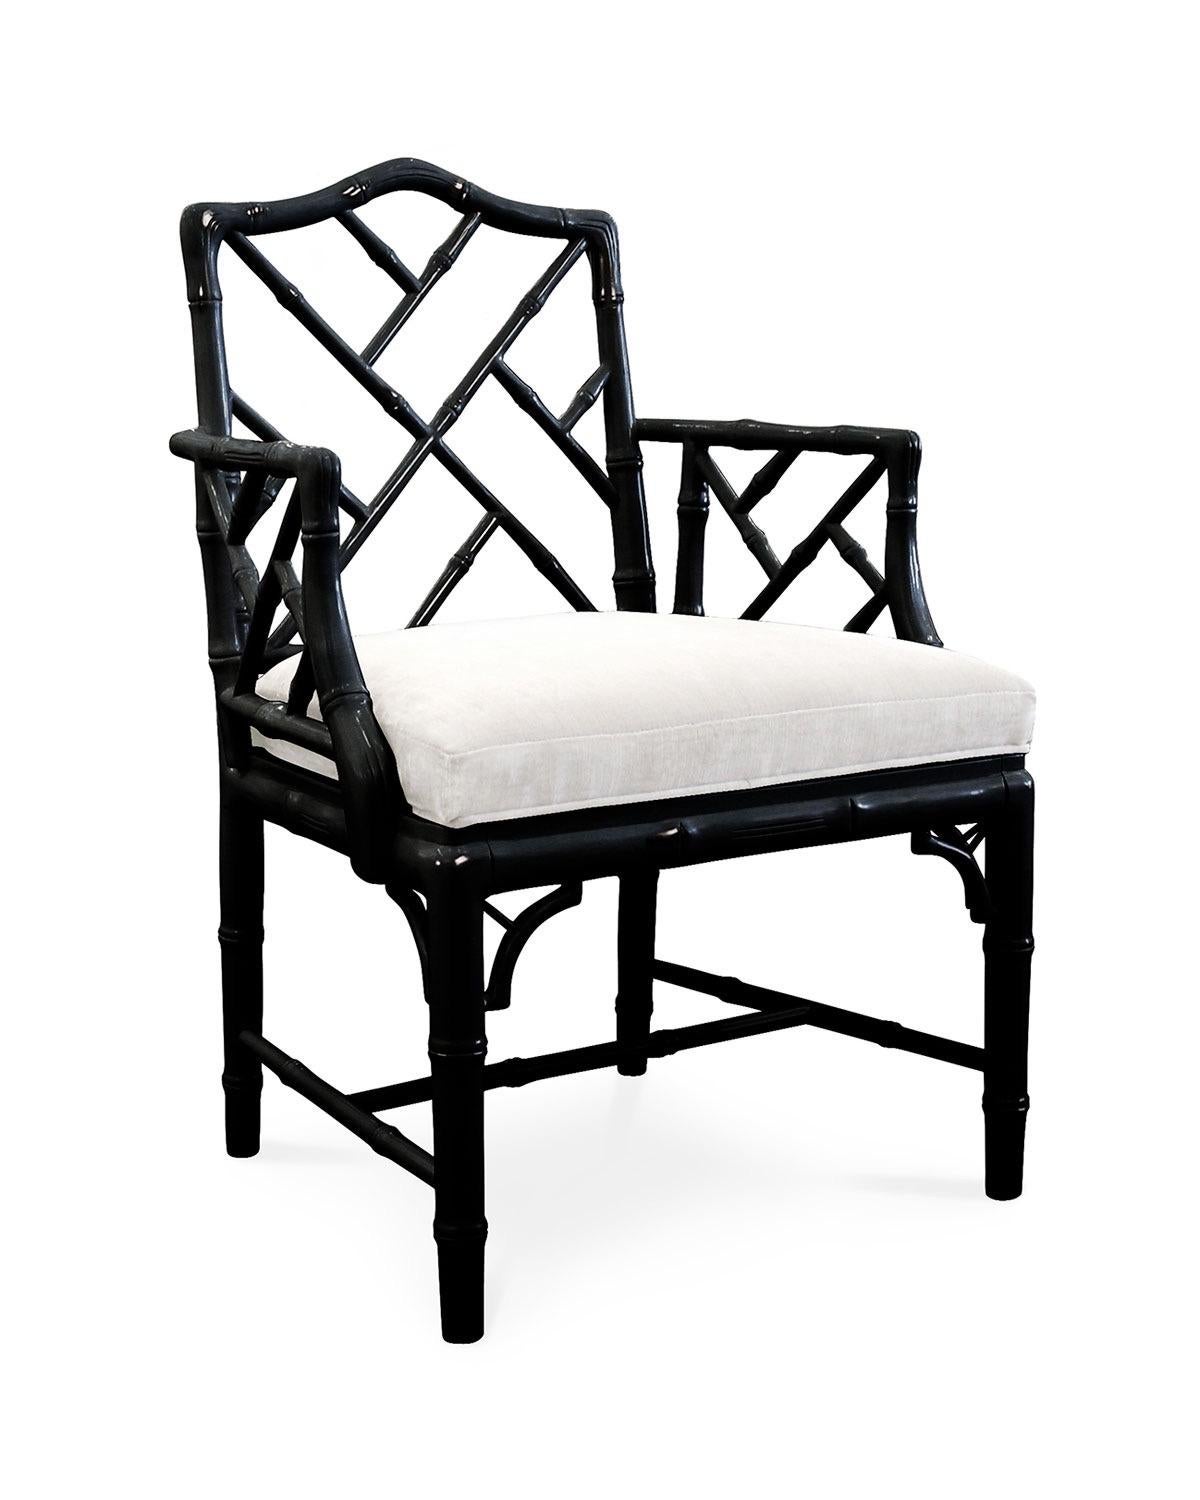 Listed is a fabulous, pair of black lacquered faux bamboo Chinese Chippendale armchairs with white linen upholstered seats, by Jonathan Adler. The chairs have been a staple in Adler's design production for years, and has recently been discontinued